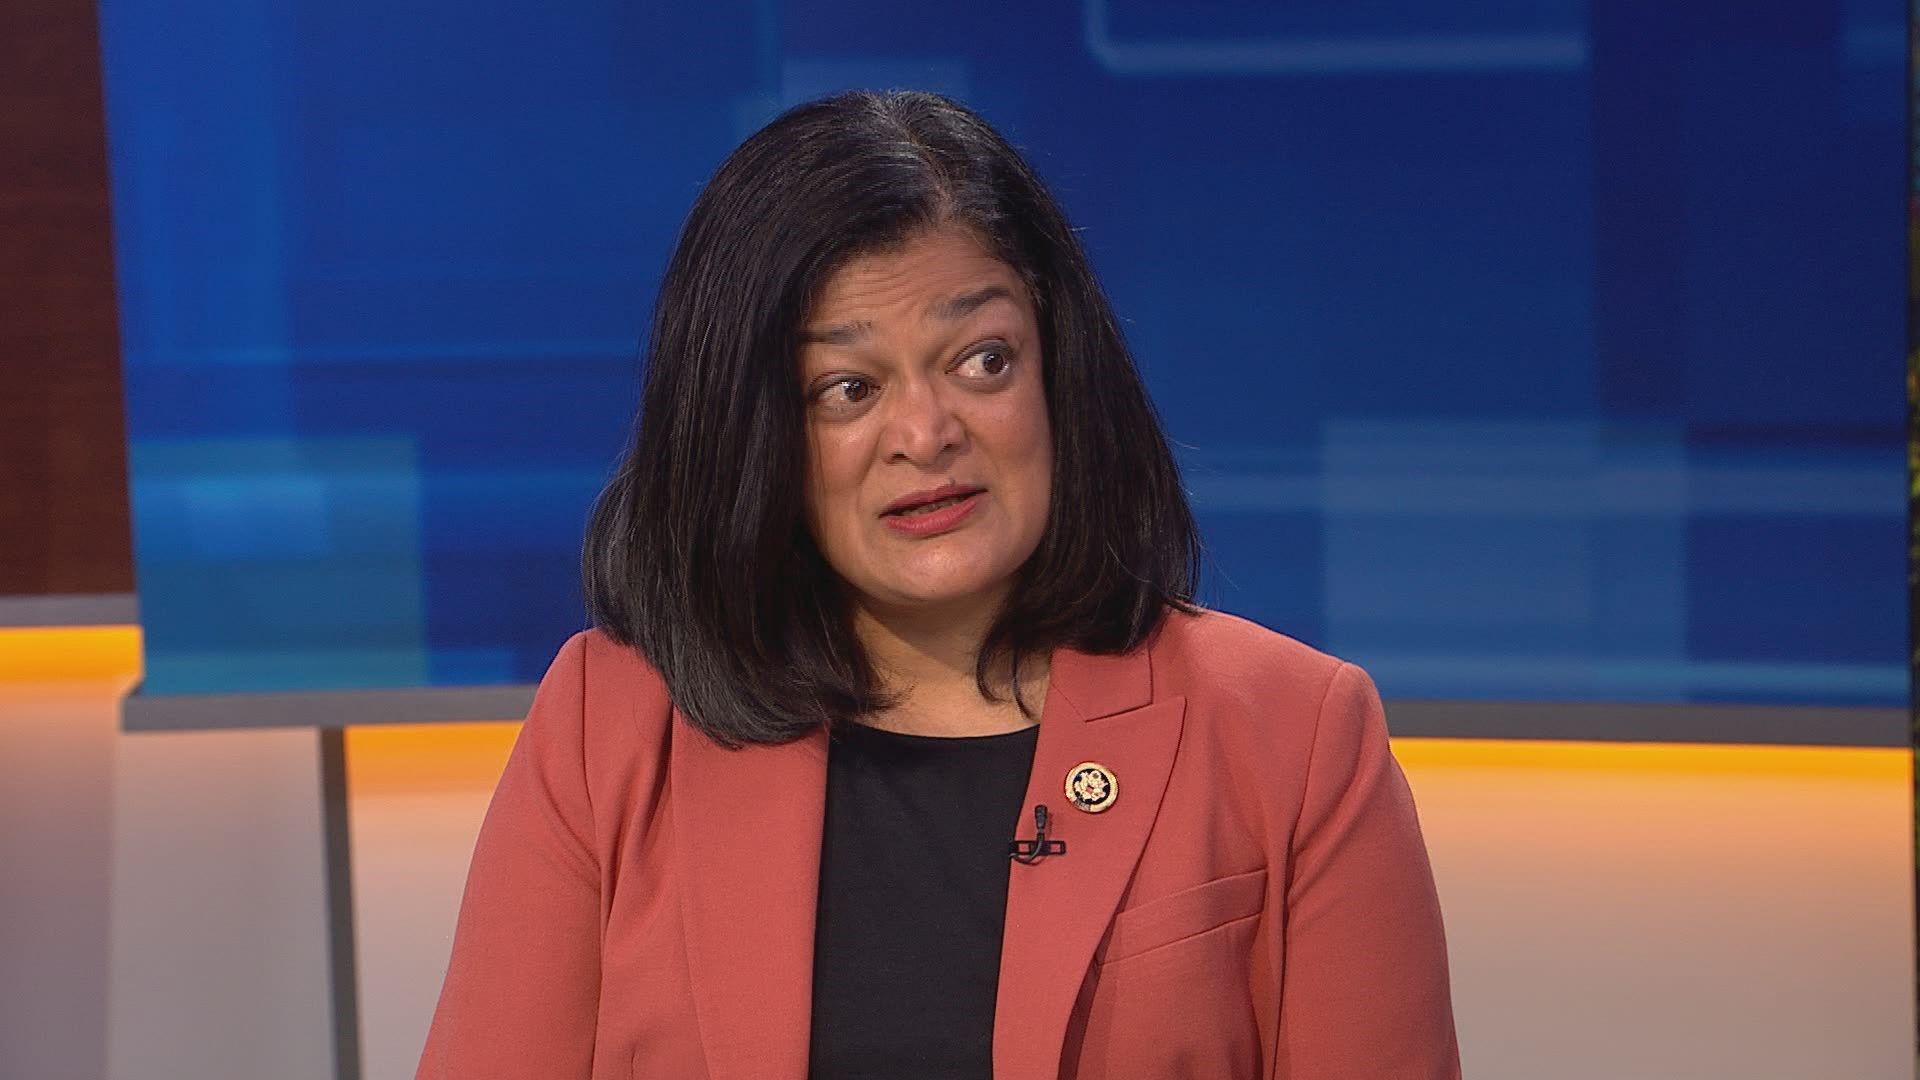 Rep. Pramila Jayapal joins KING 5 to discuss infrastructure, the war in Gaza, the TikTok ban vote and more.